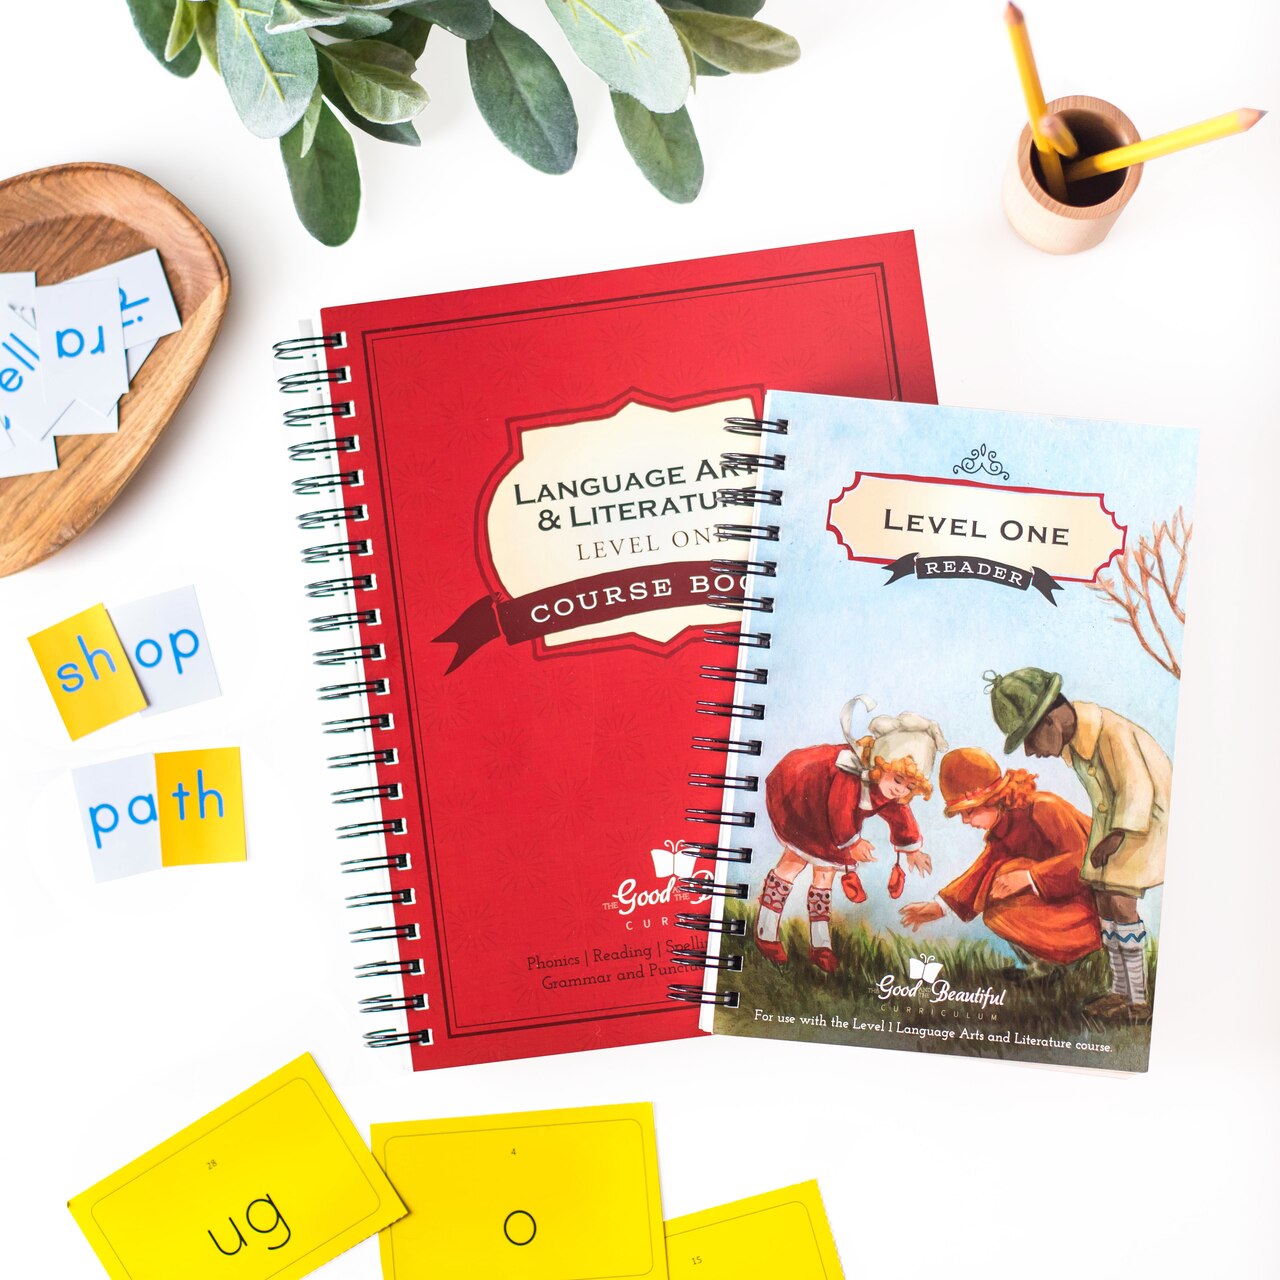 language arts homeschool curriculum for 1st grade includes course book, reader, and phonics cards